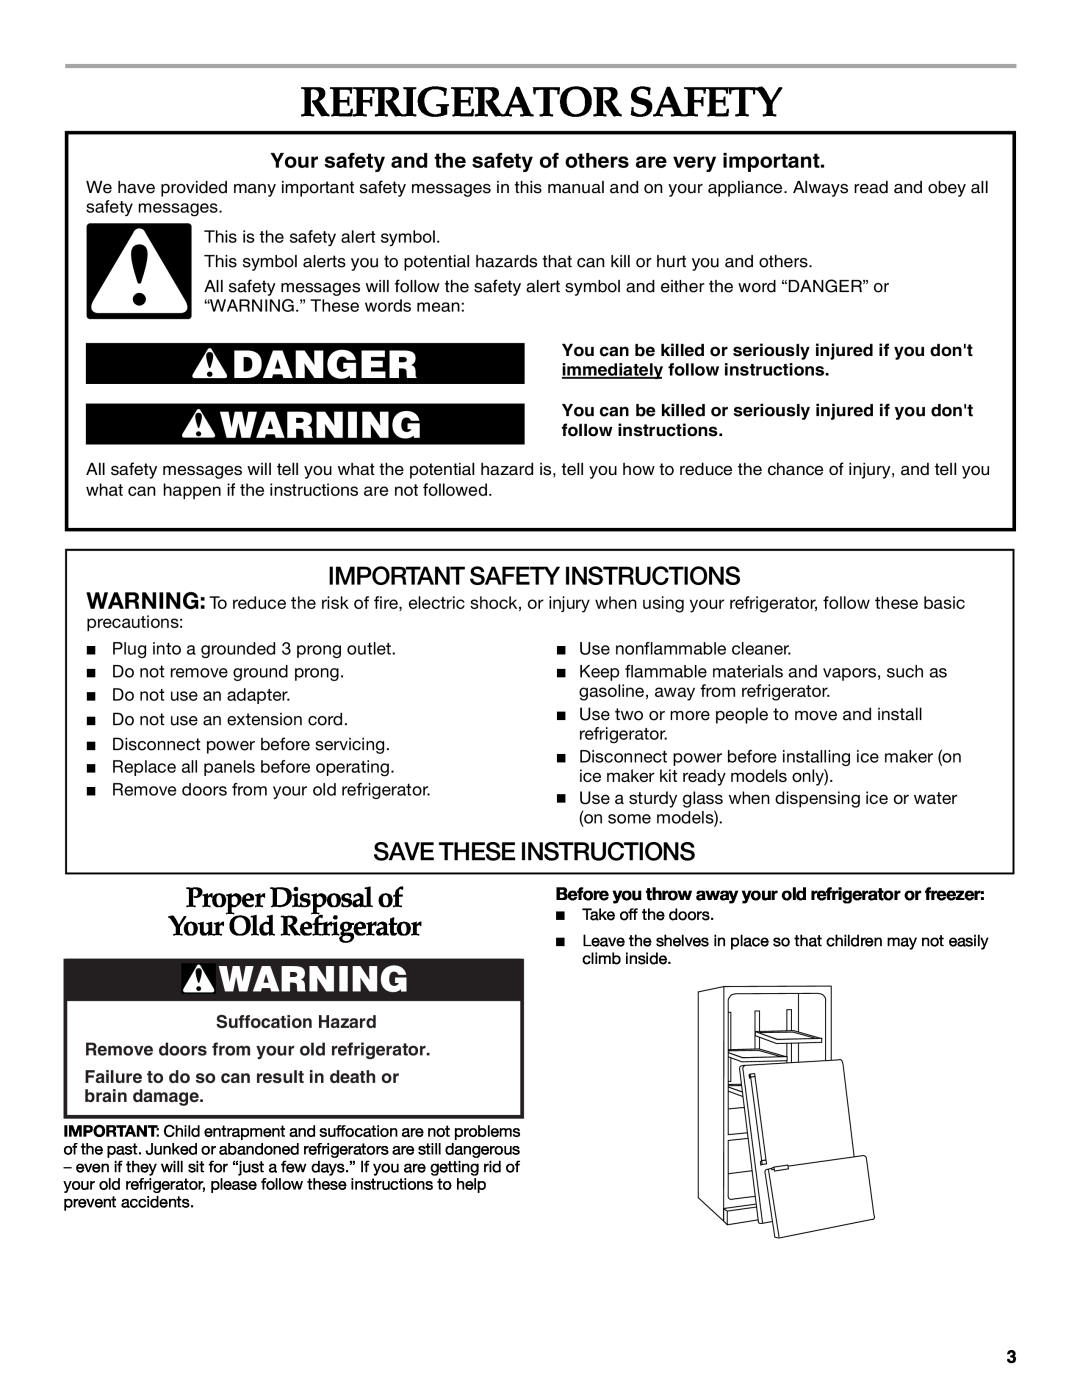 KitchenAid 12642708SP manual Refrigerator Safety, Proper Disposal of Your Old Refrigerator, Important Safety Instructions 